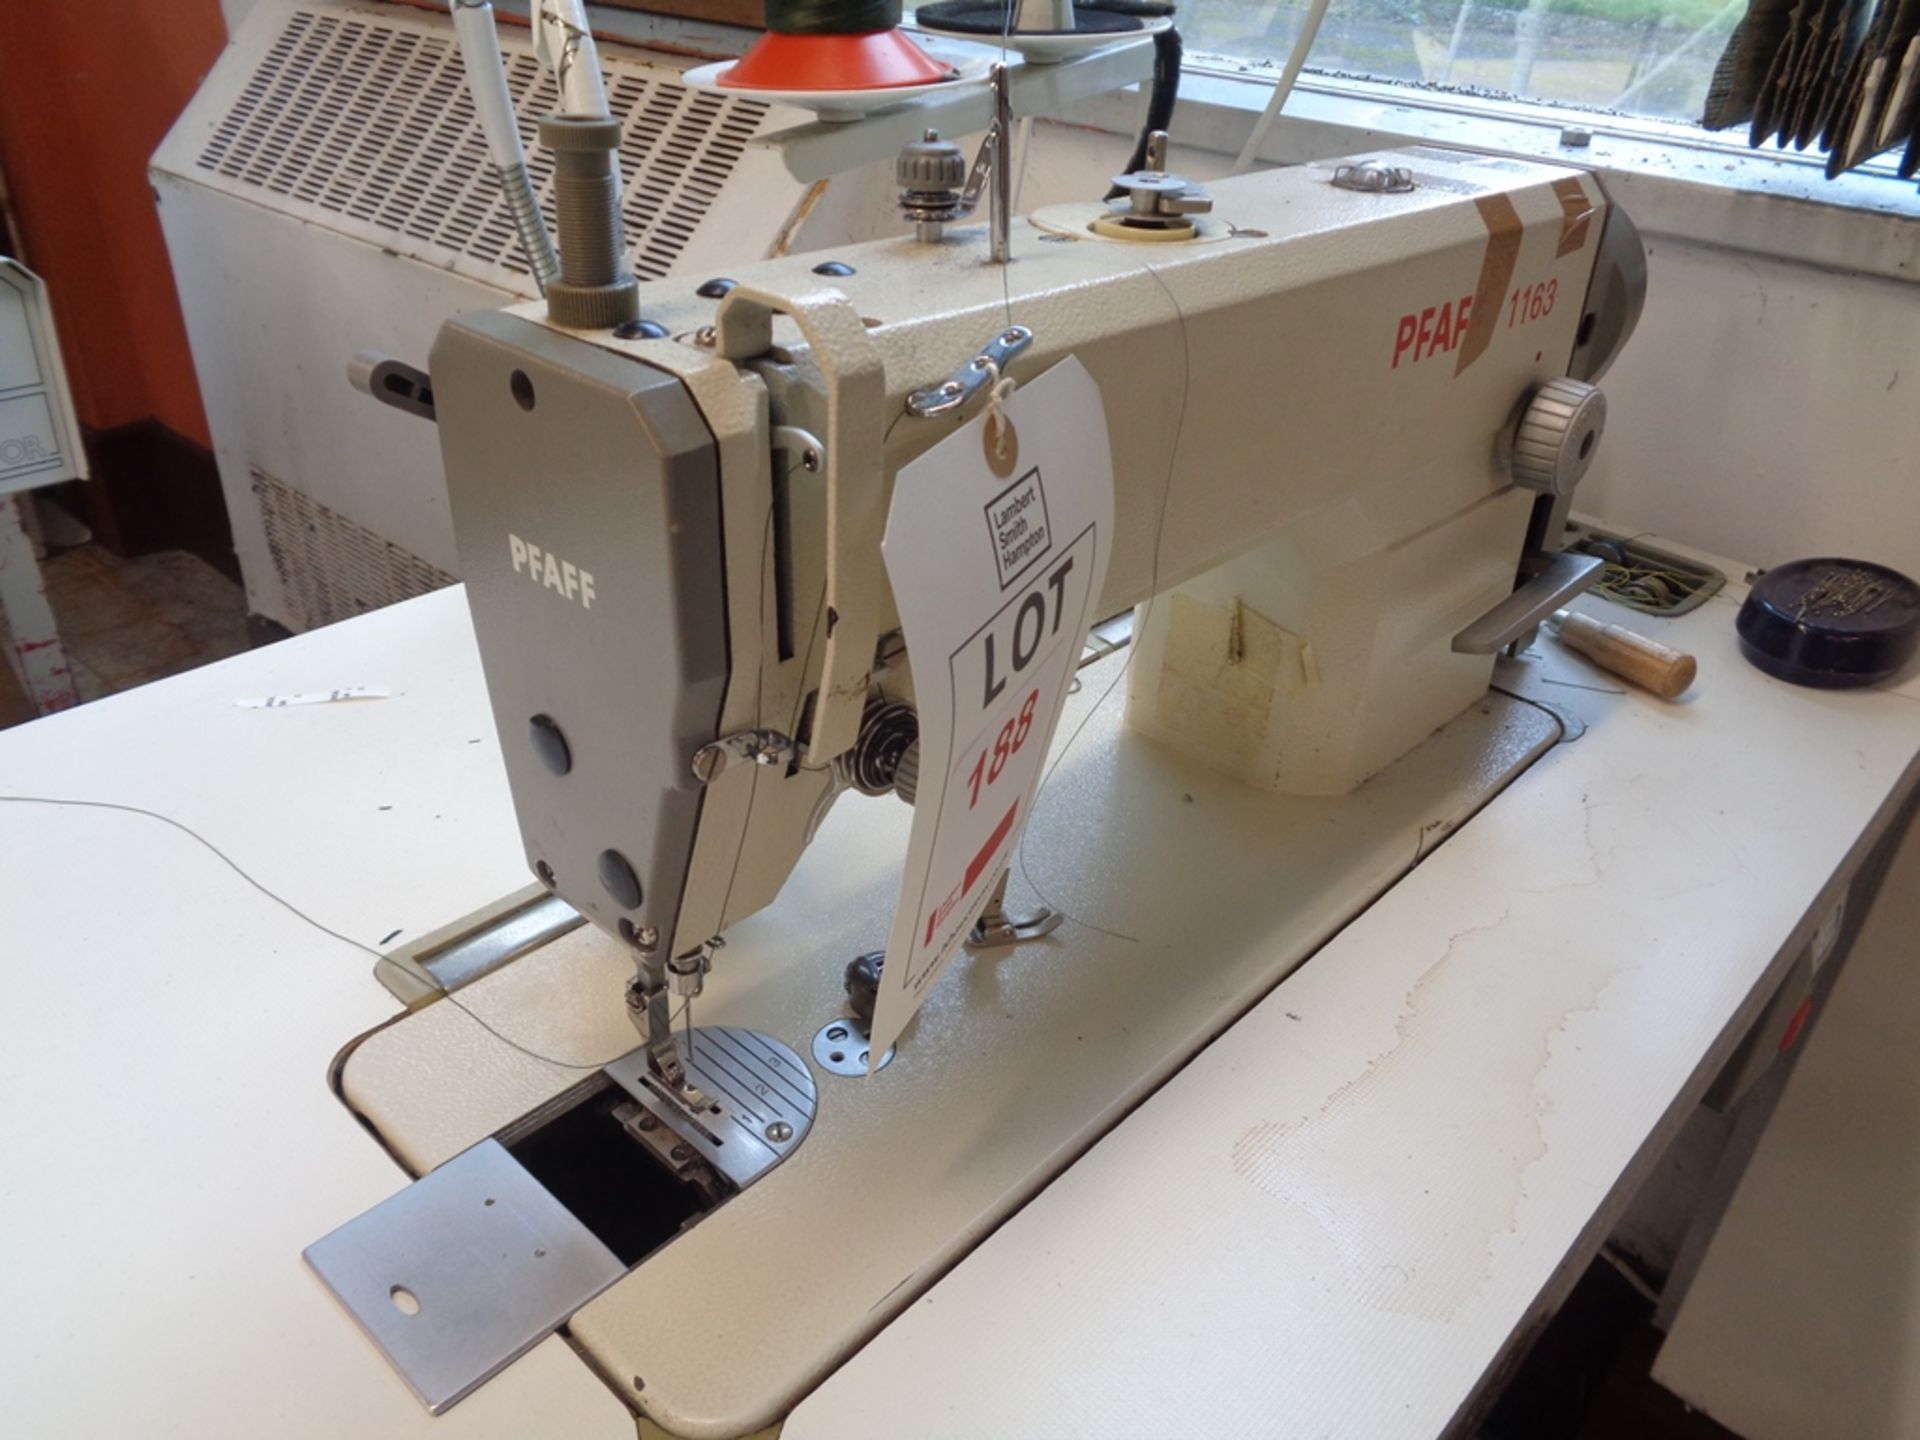 PFAFF 1163 lockstitch sewing machine with walking foot, type 1163-6/01-BS, serial no. 8011604 - Image 3 of 5